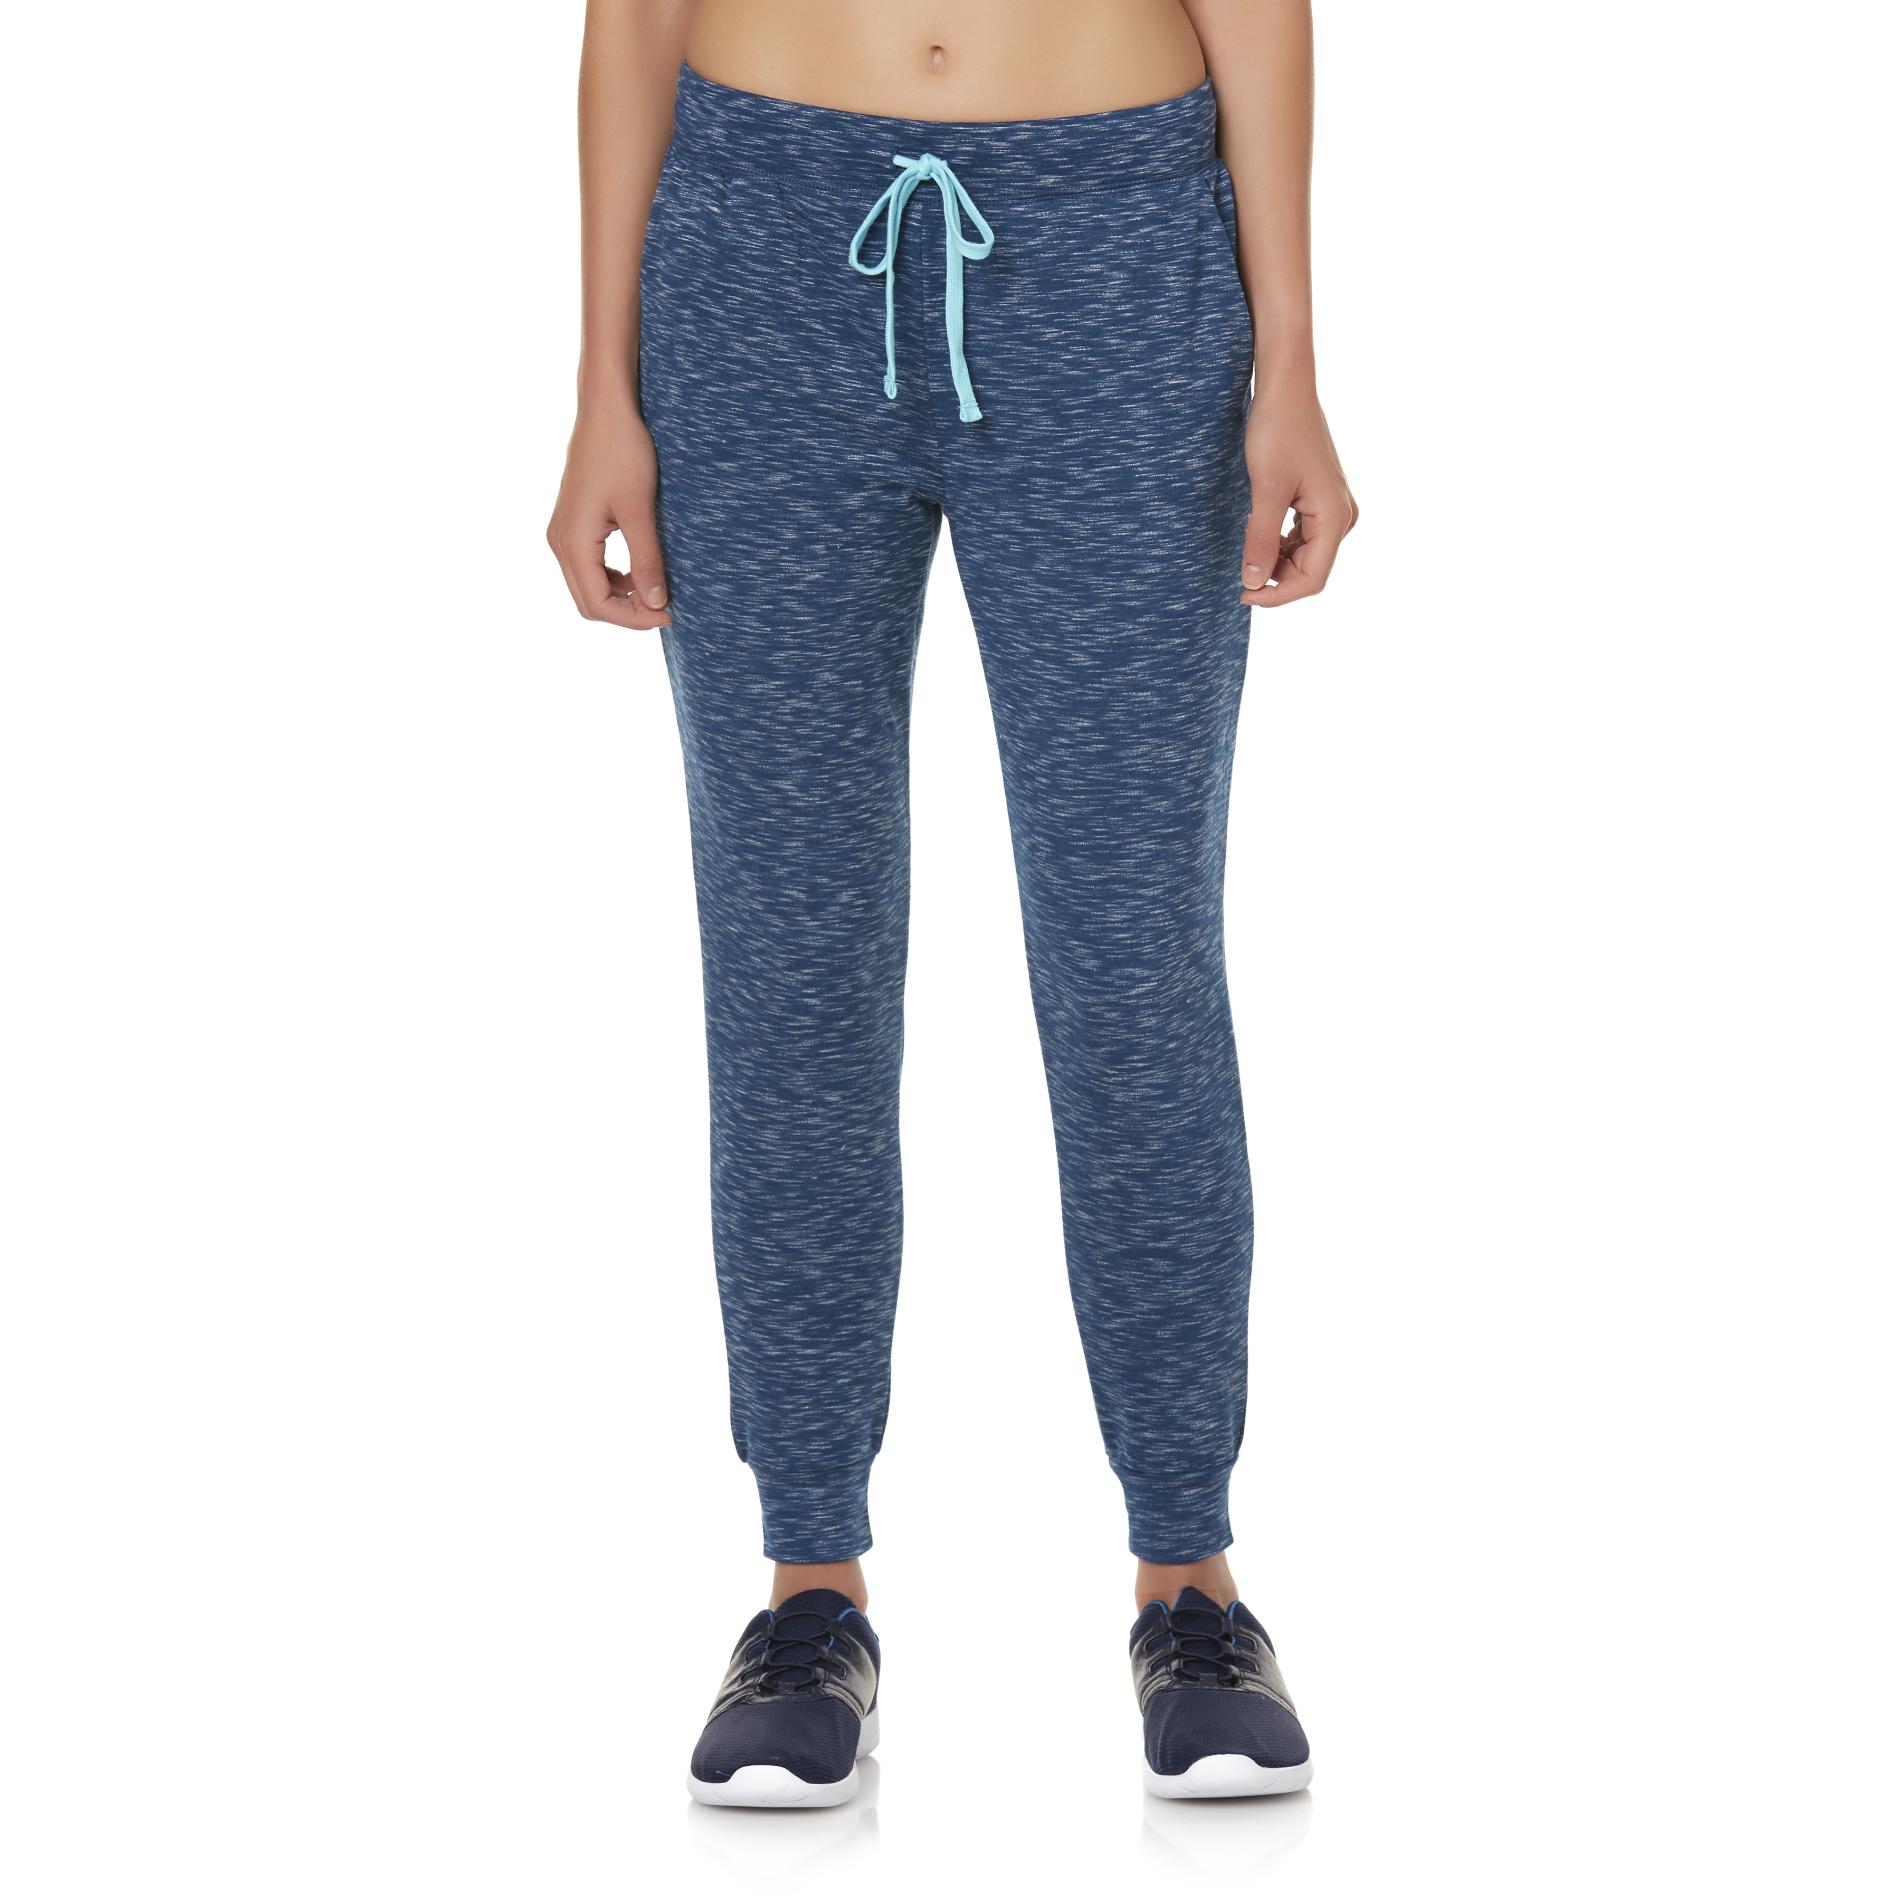 Everlast® Women's Athletic Jogger Pants - Space-Dyed